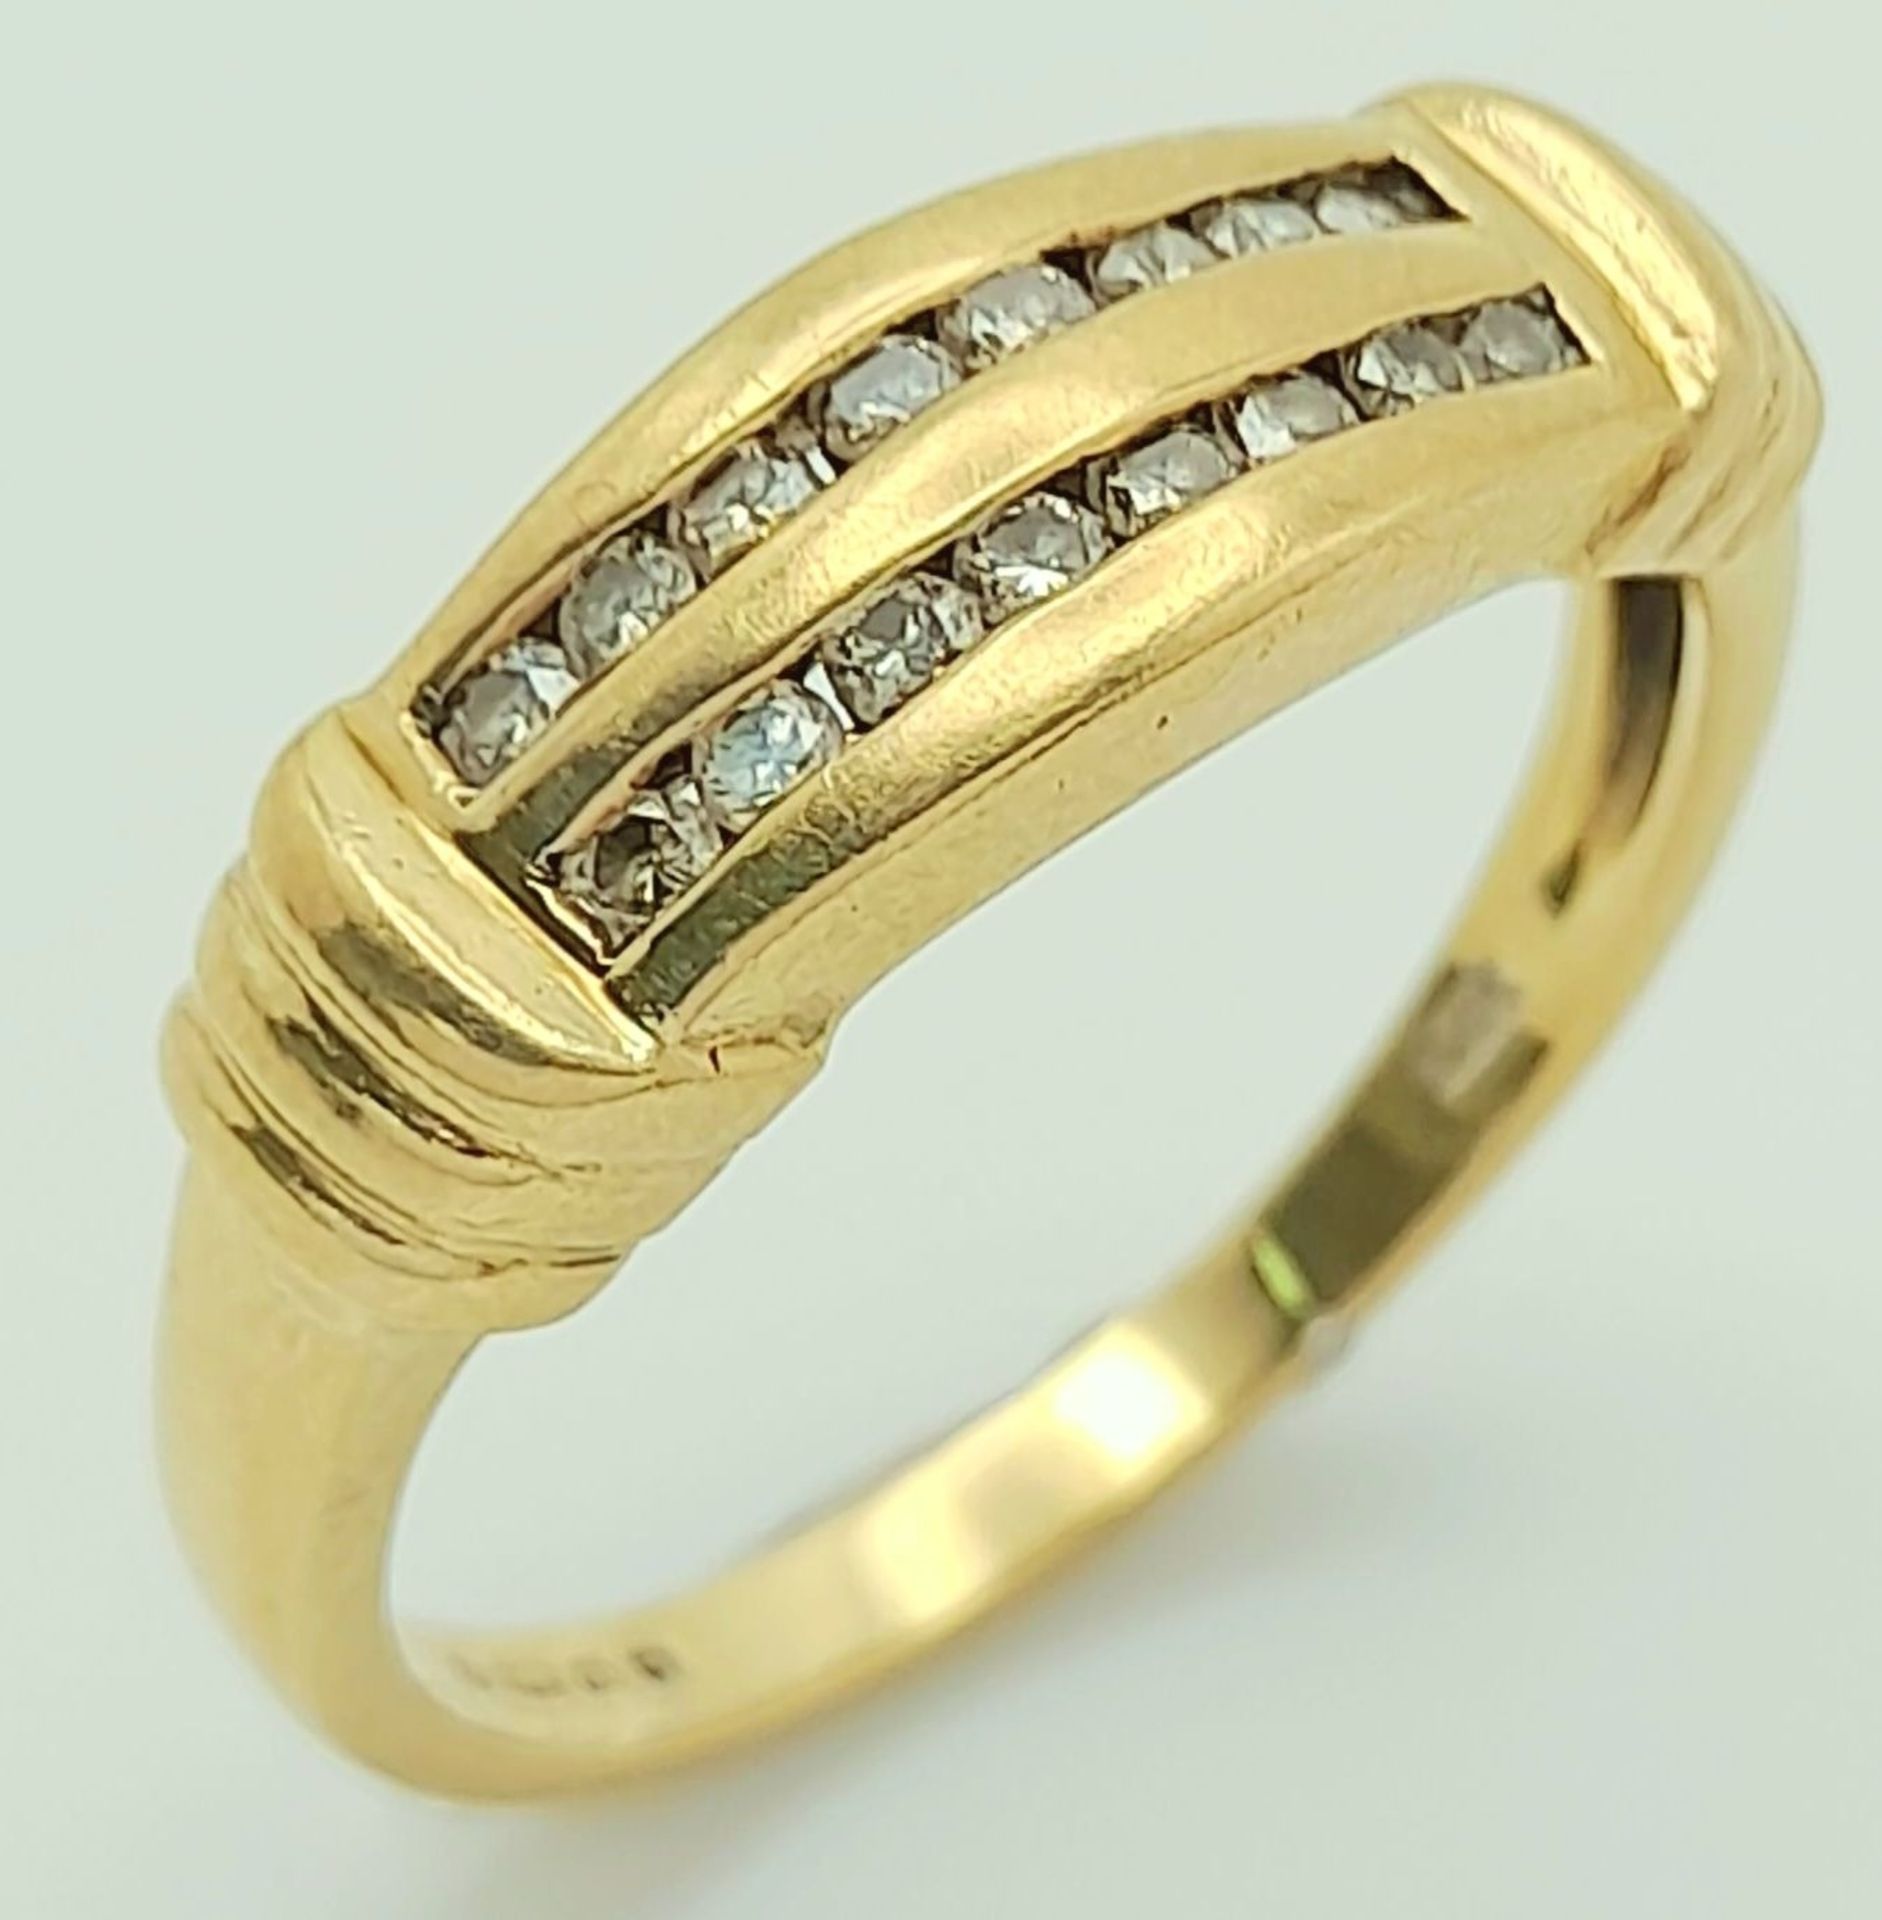 A 2003 Hallmarked 9K Gold Double Channel Set Diamond Ring. Size N. Set with Sixteen x 1mm Round